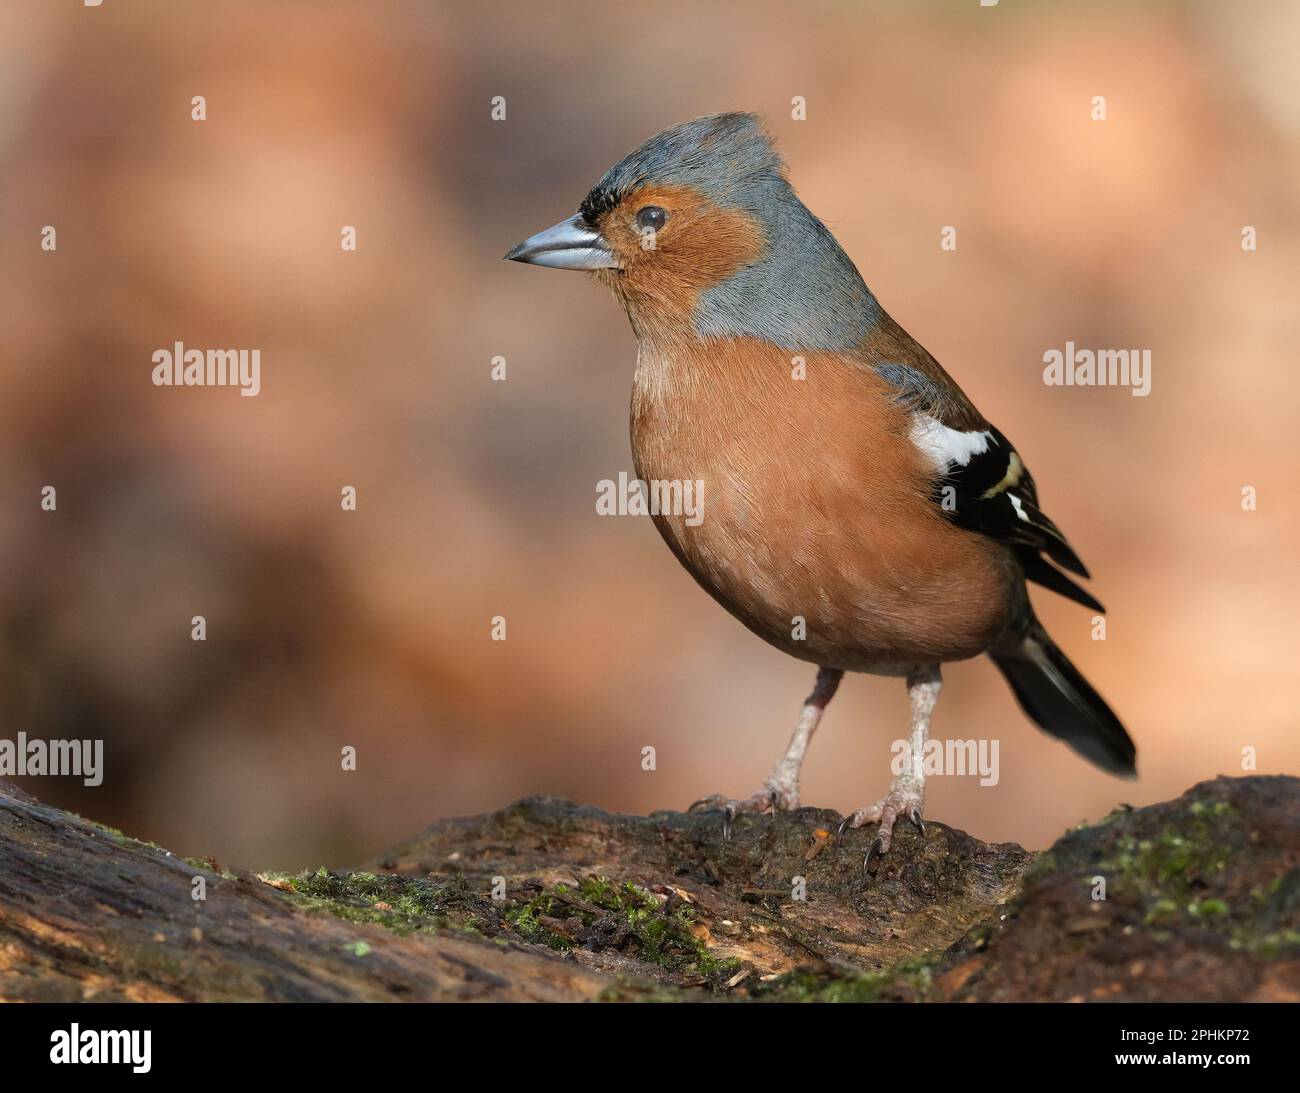 The common chaffinch or simply the chaffinch is a common and widespread small passerine bird in the finch family. Stock Photo